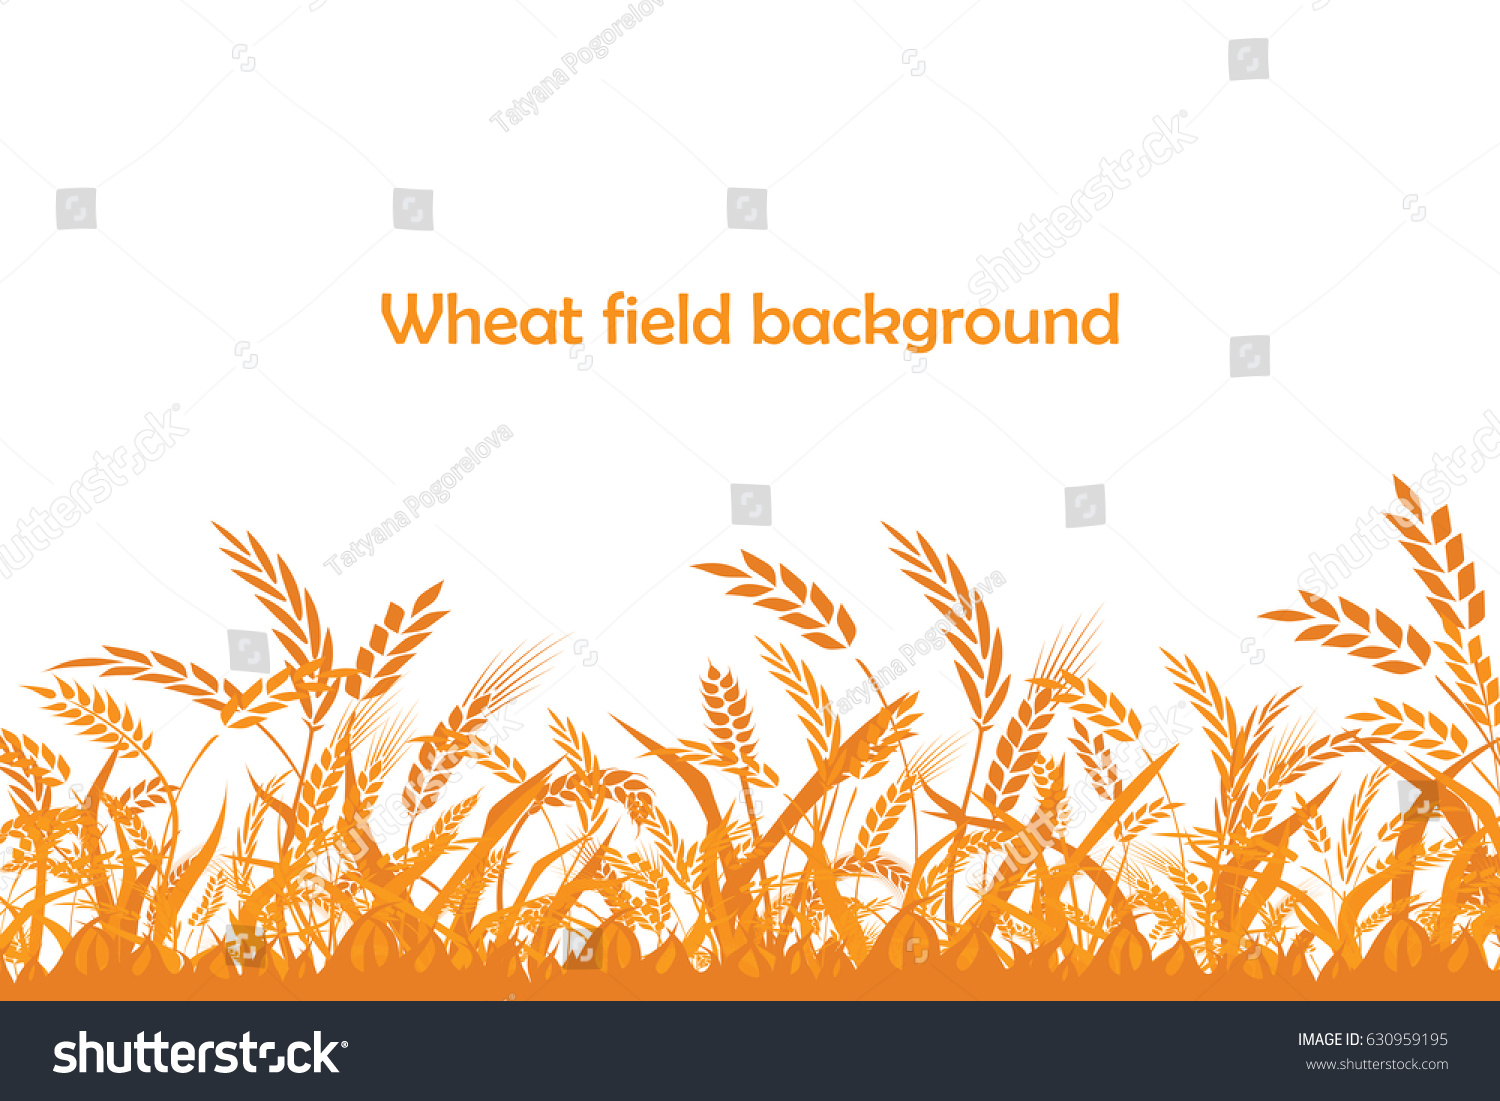 httpsimage vectorvector silhouette wheat field on white 630959195